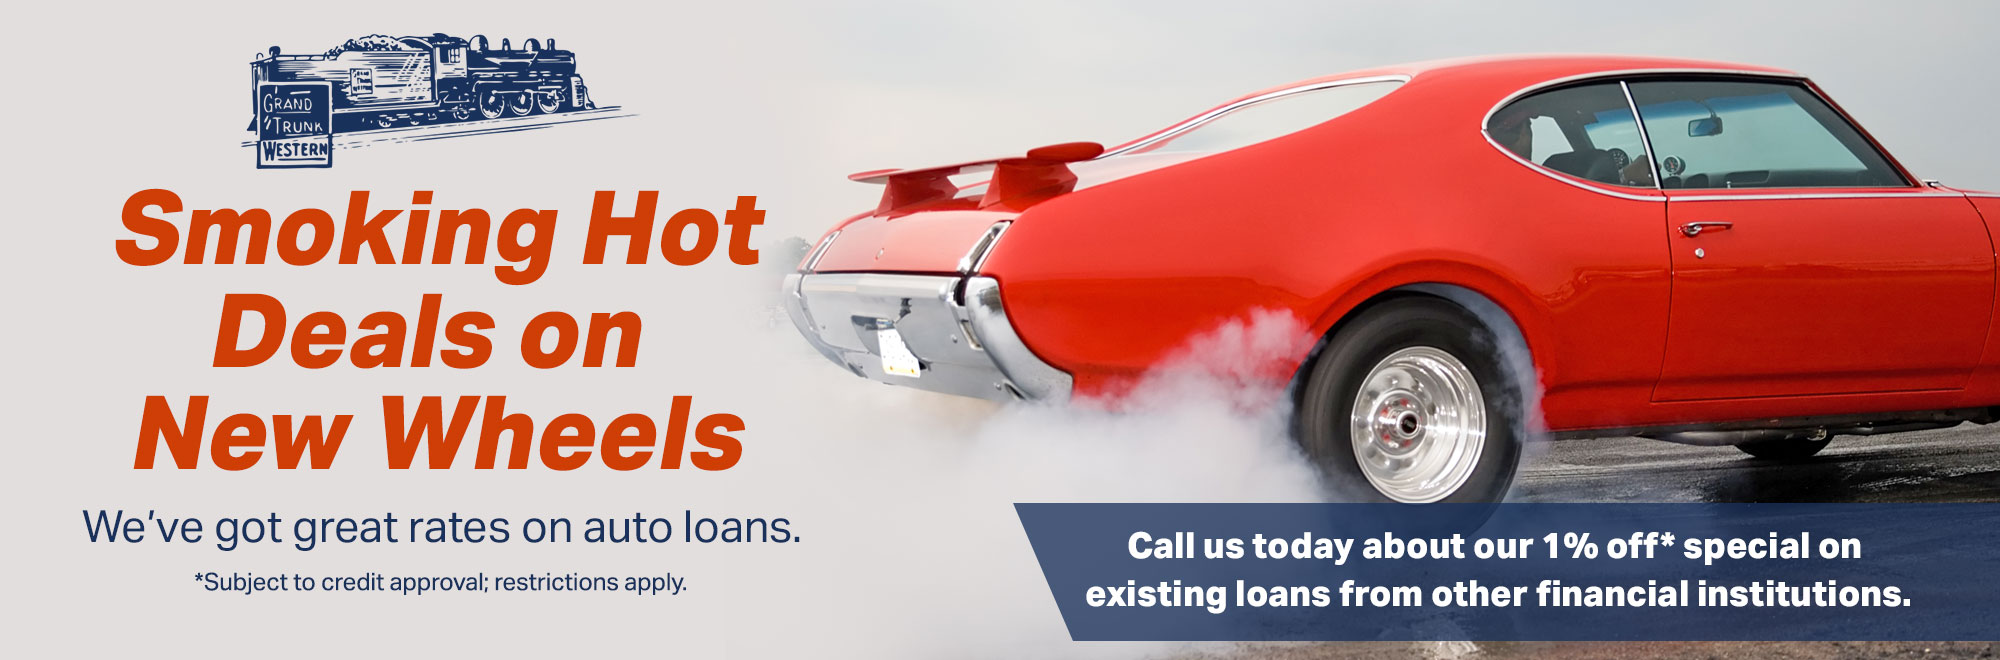 Smoking Hot Deals on New Wheels. We've got Great rates on Auto Loans. Call us today about our 1% off special on existing loans from other financial institutions. Subject to credit approval; restrictions apply.